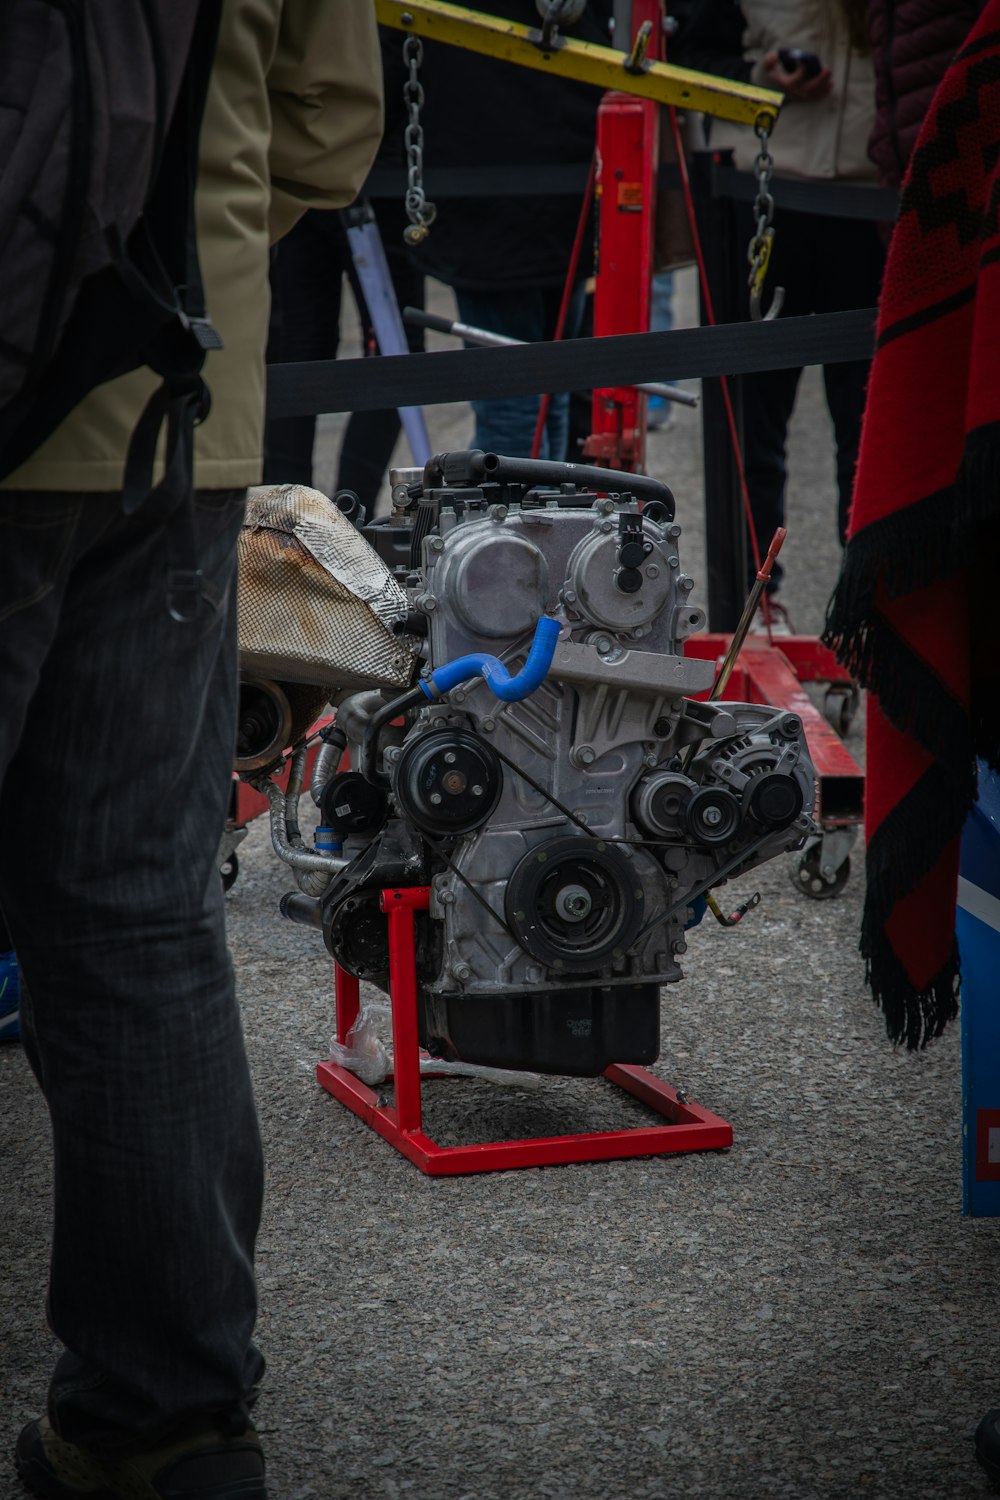 a close up of a engine on a stand